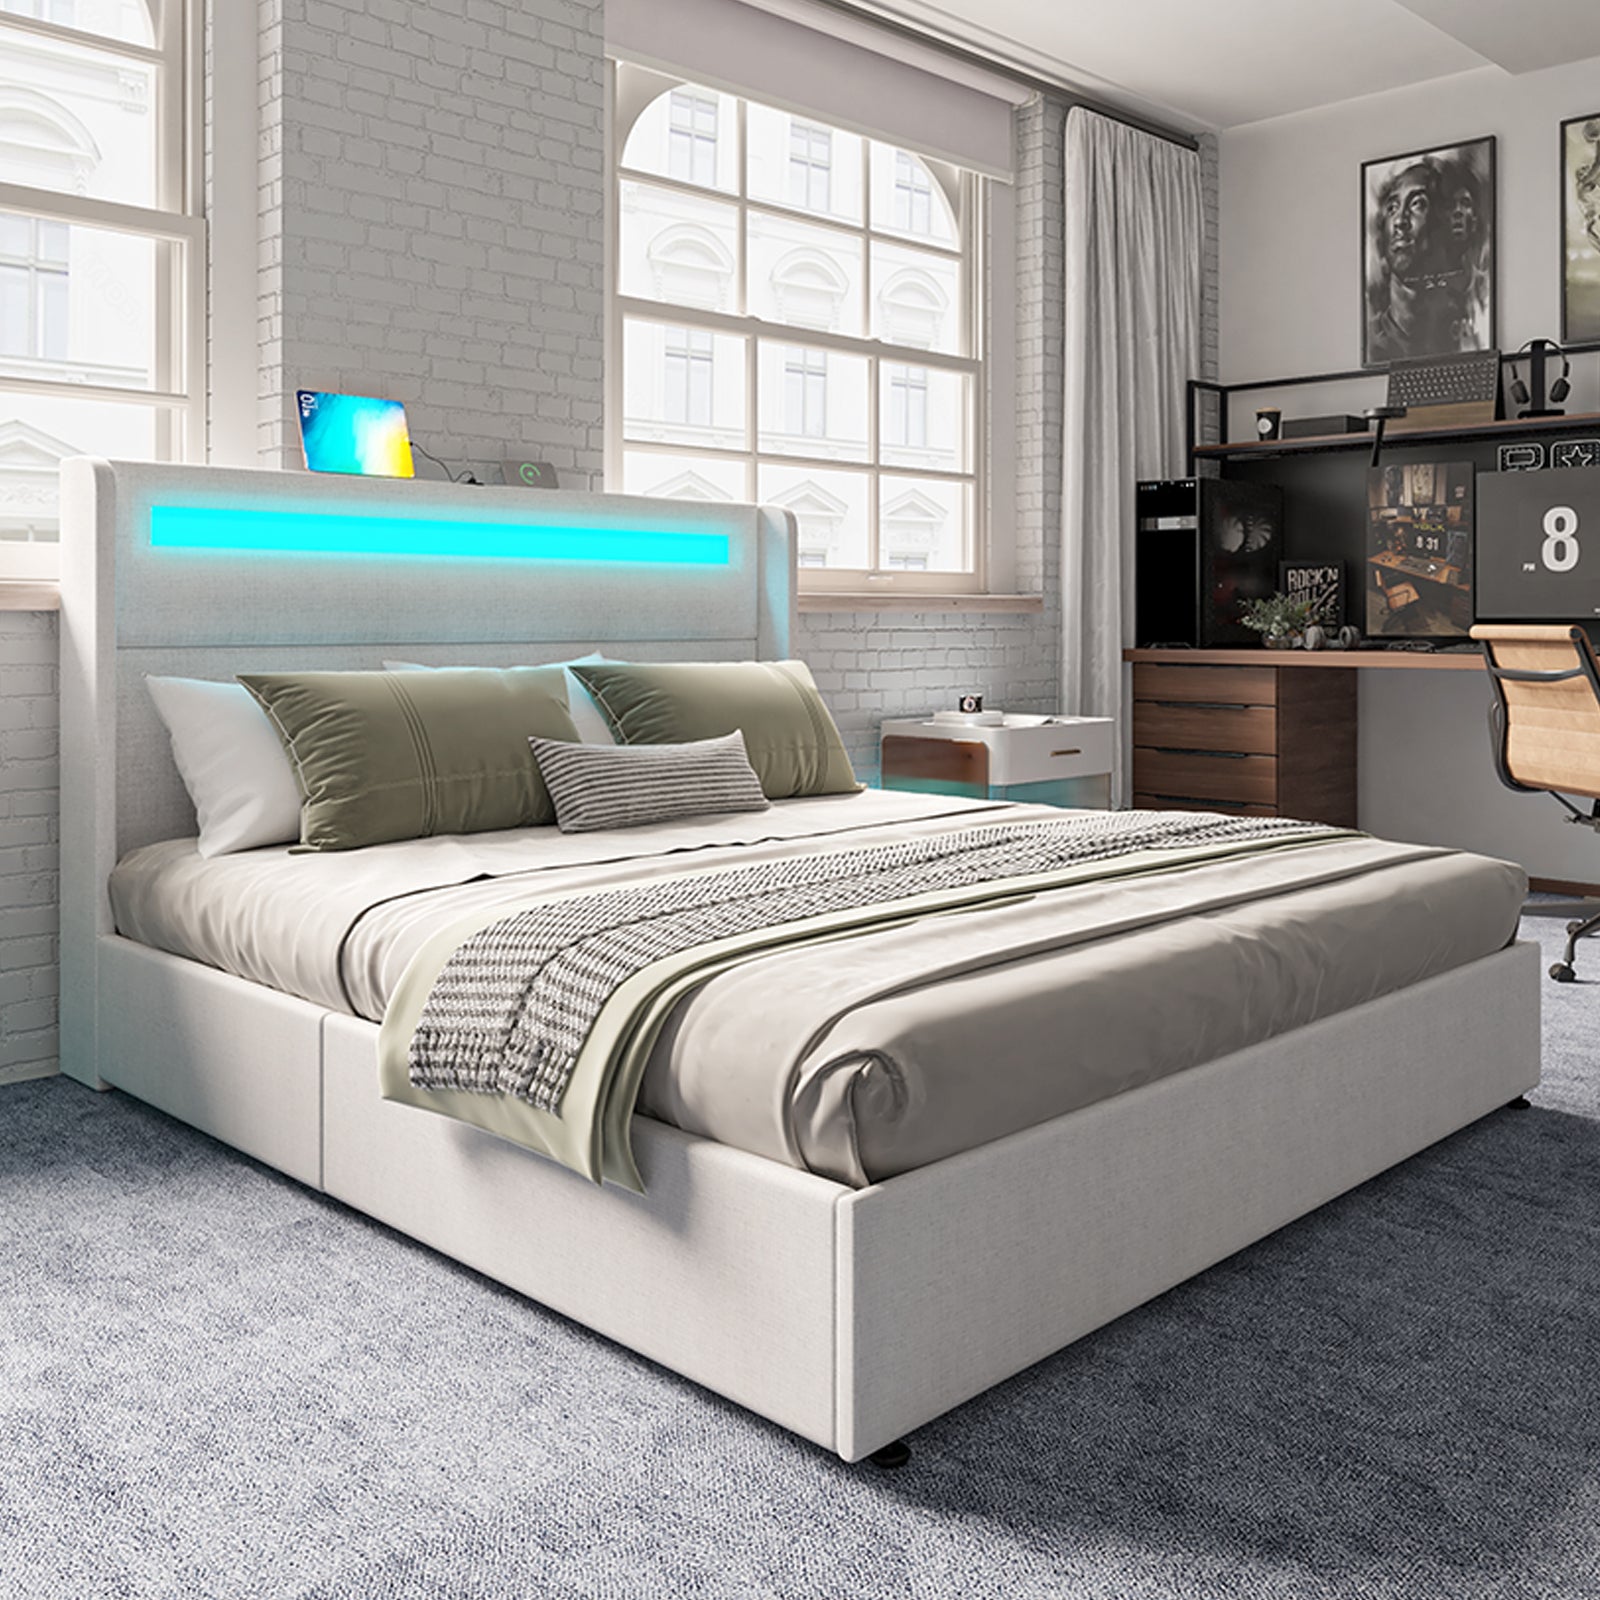 The albion king in cream in a loft style bedroom, the storage drawers are closed and the integrated rgb headboard is illuminated in blue